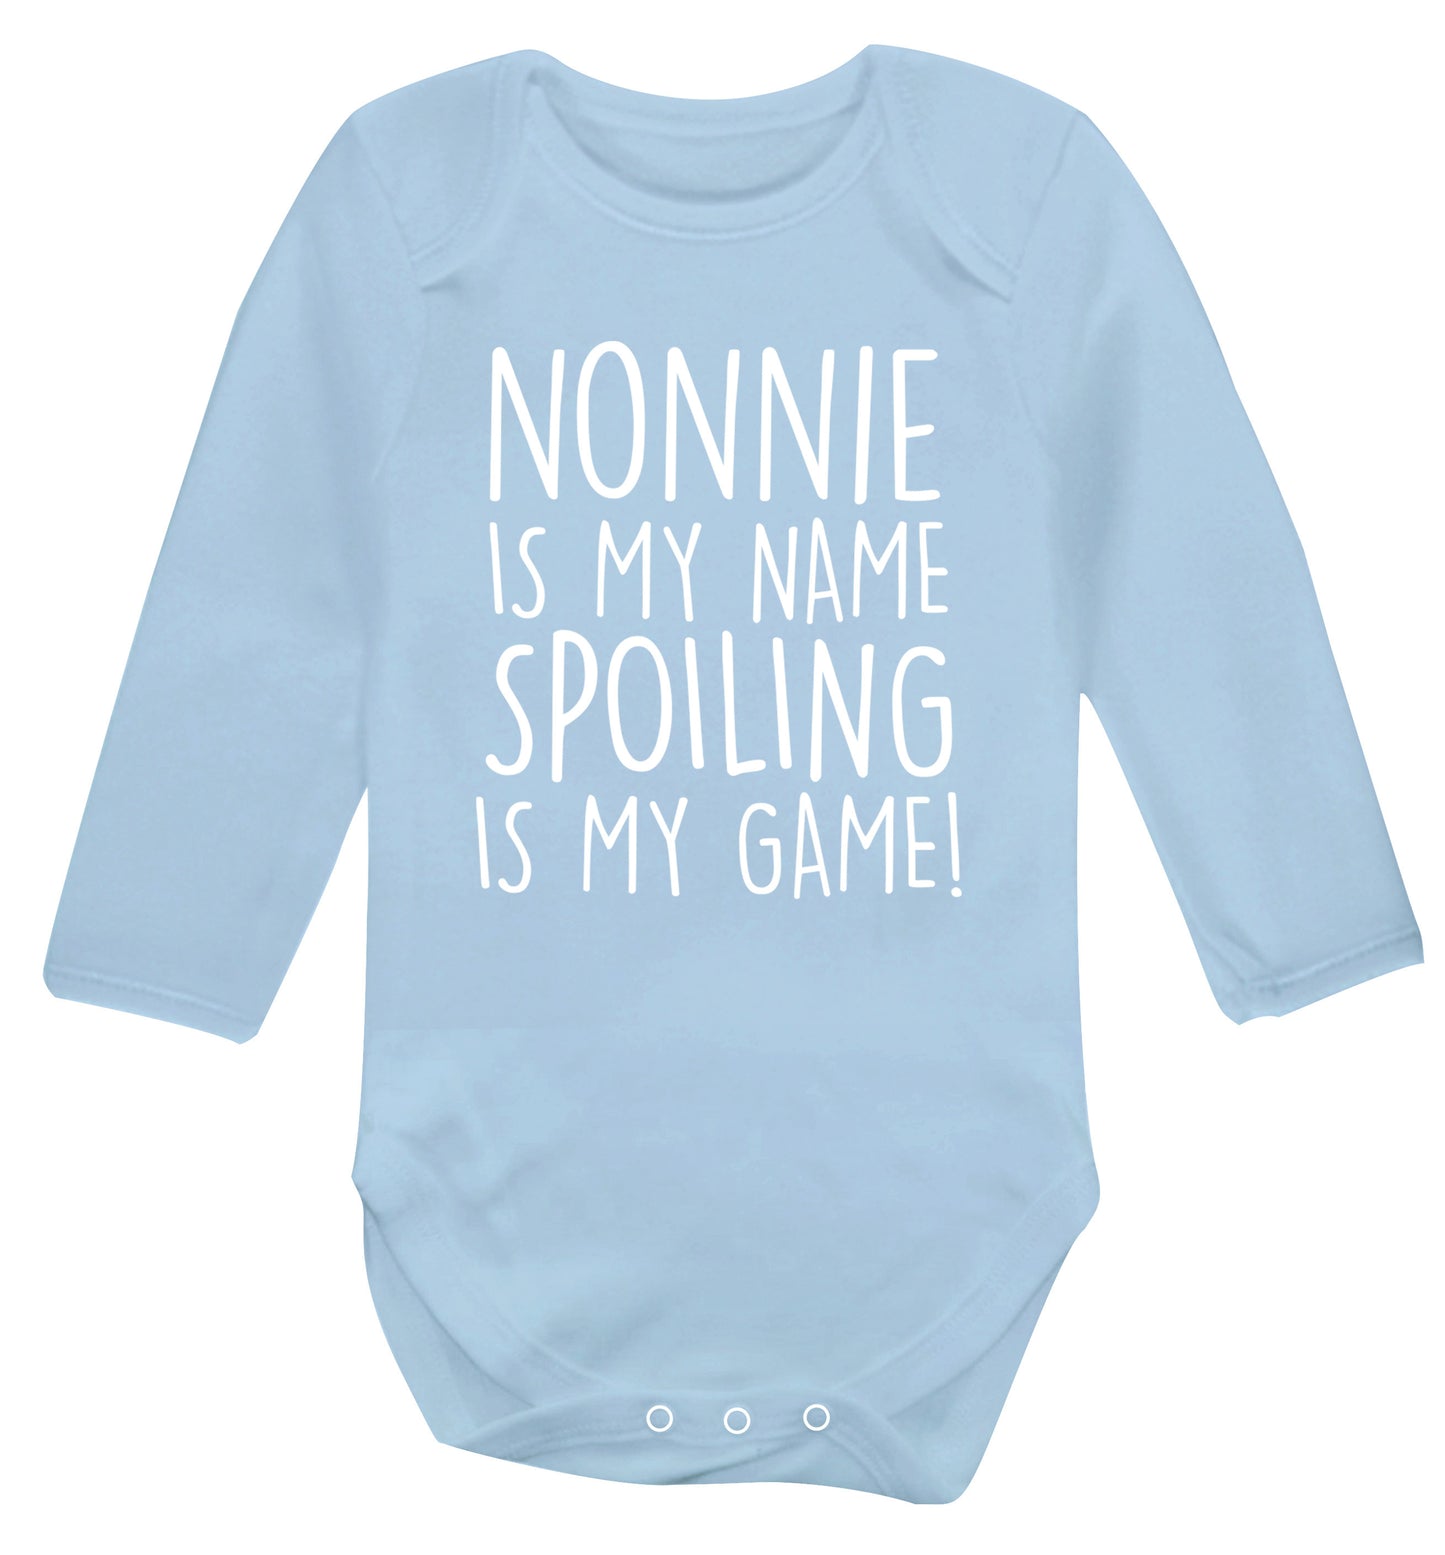 Nonnie is my name, spoiling is my game Baby Vest long sleeved pale blue 6-12 months